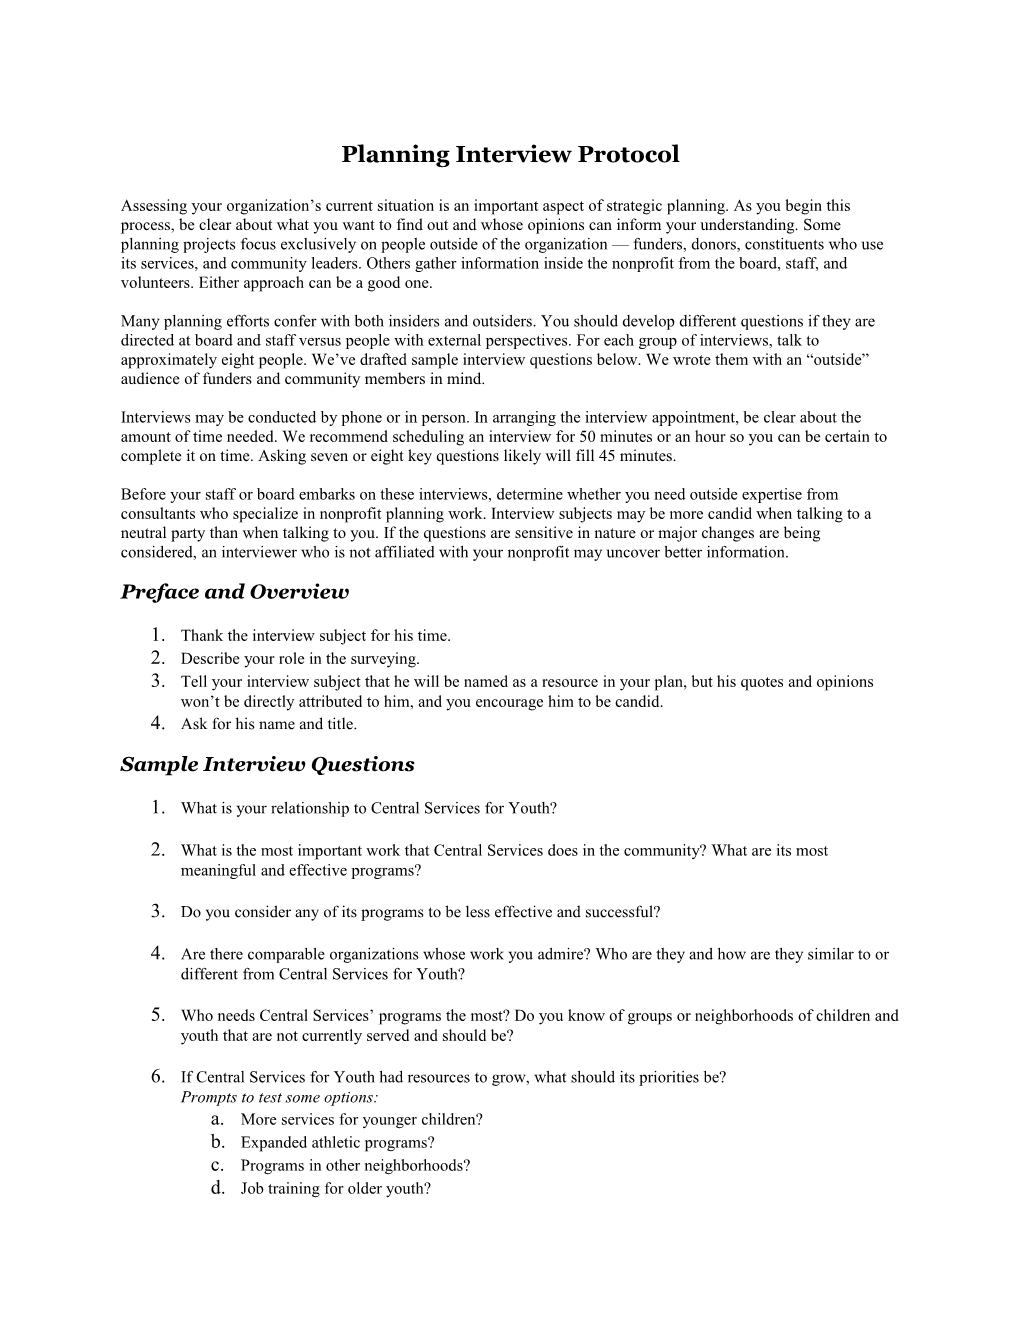 Planning Interview Protocol